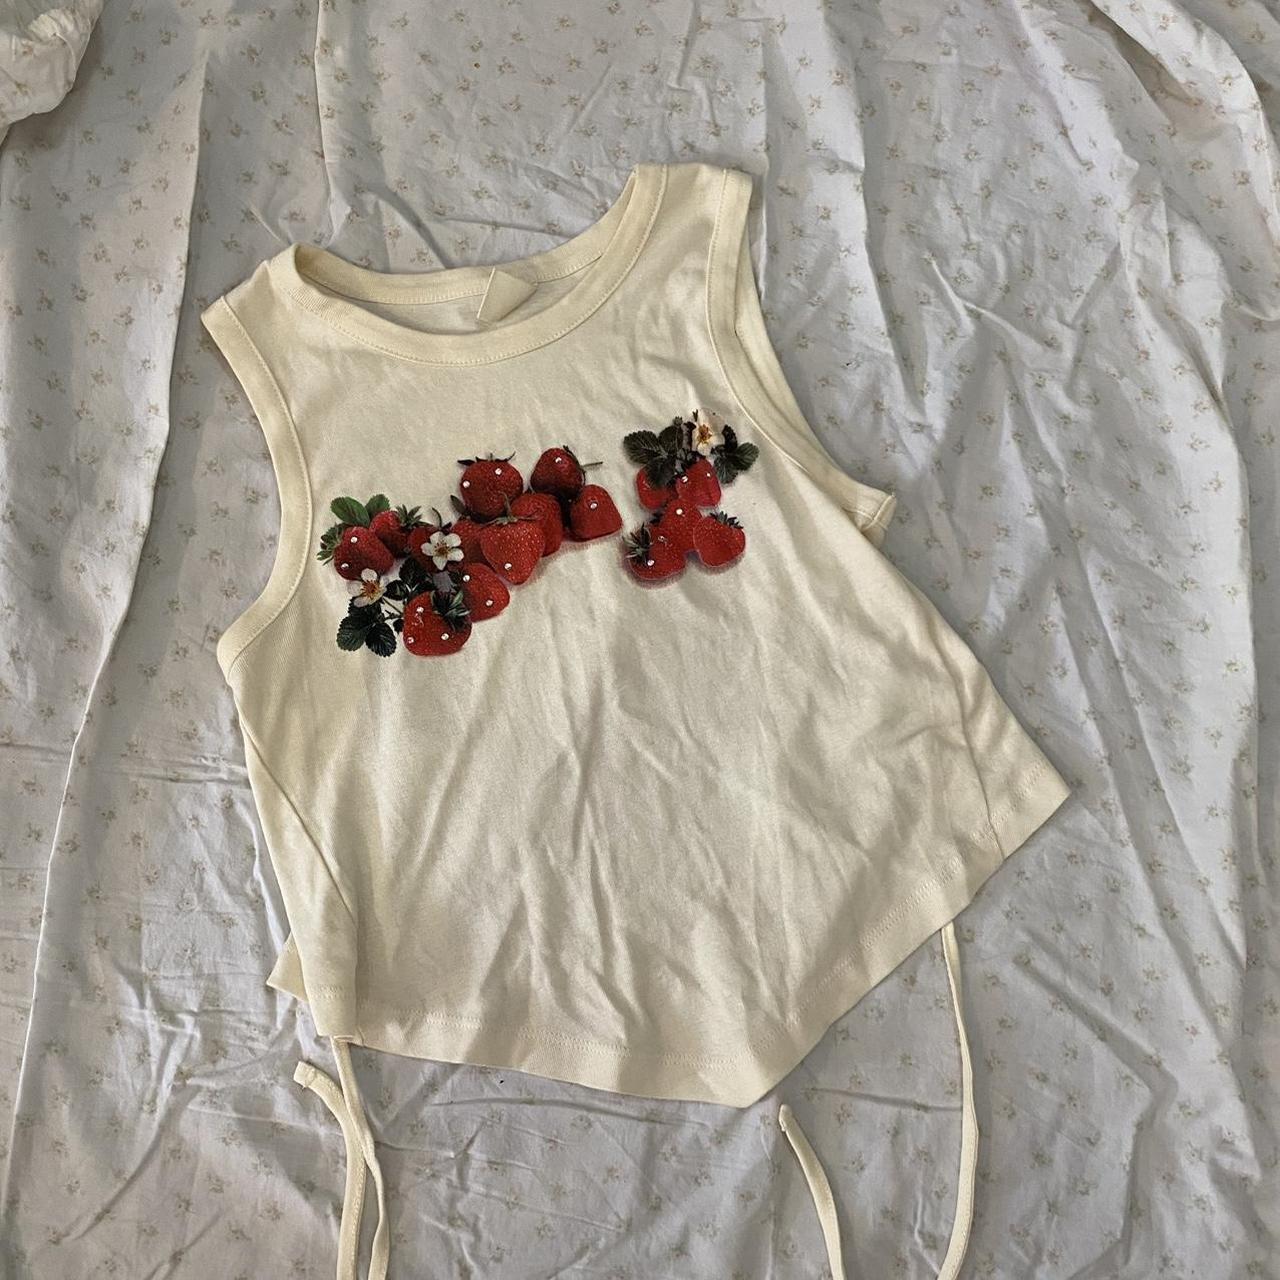 Urban Outfitters Women's Cream and Red Crop-top